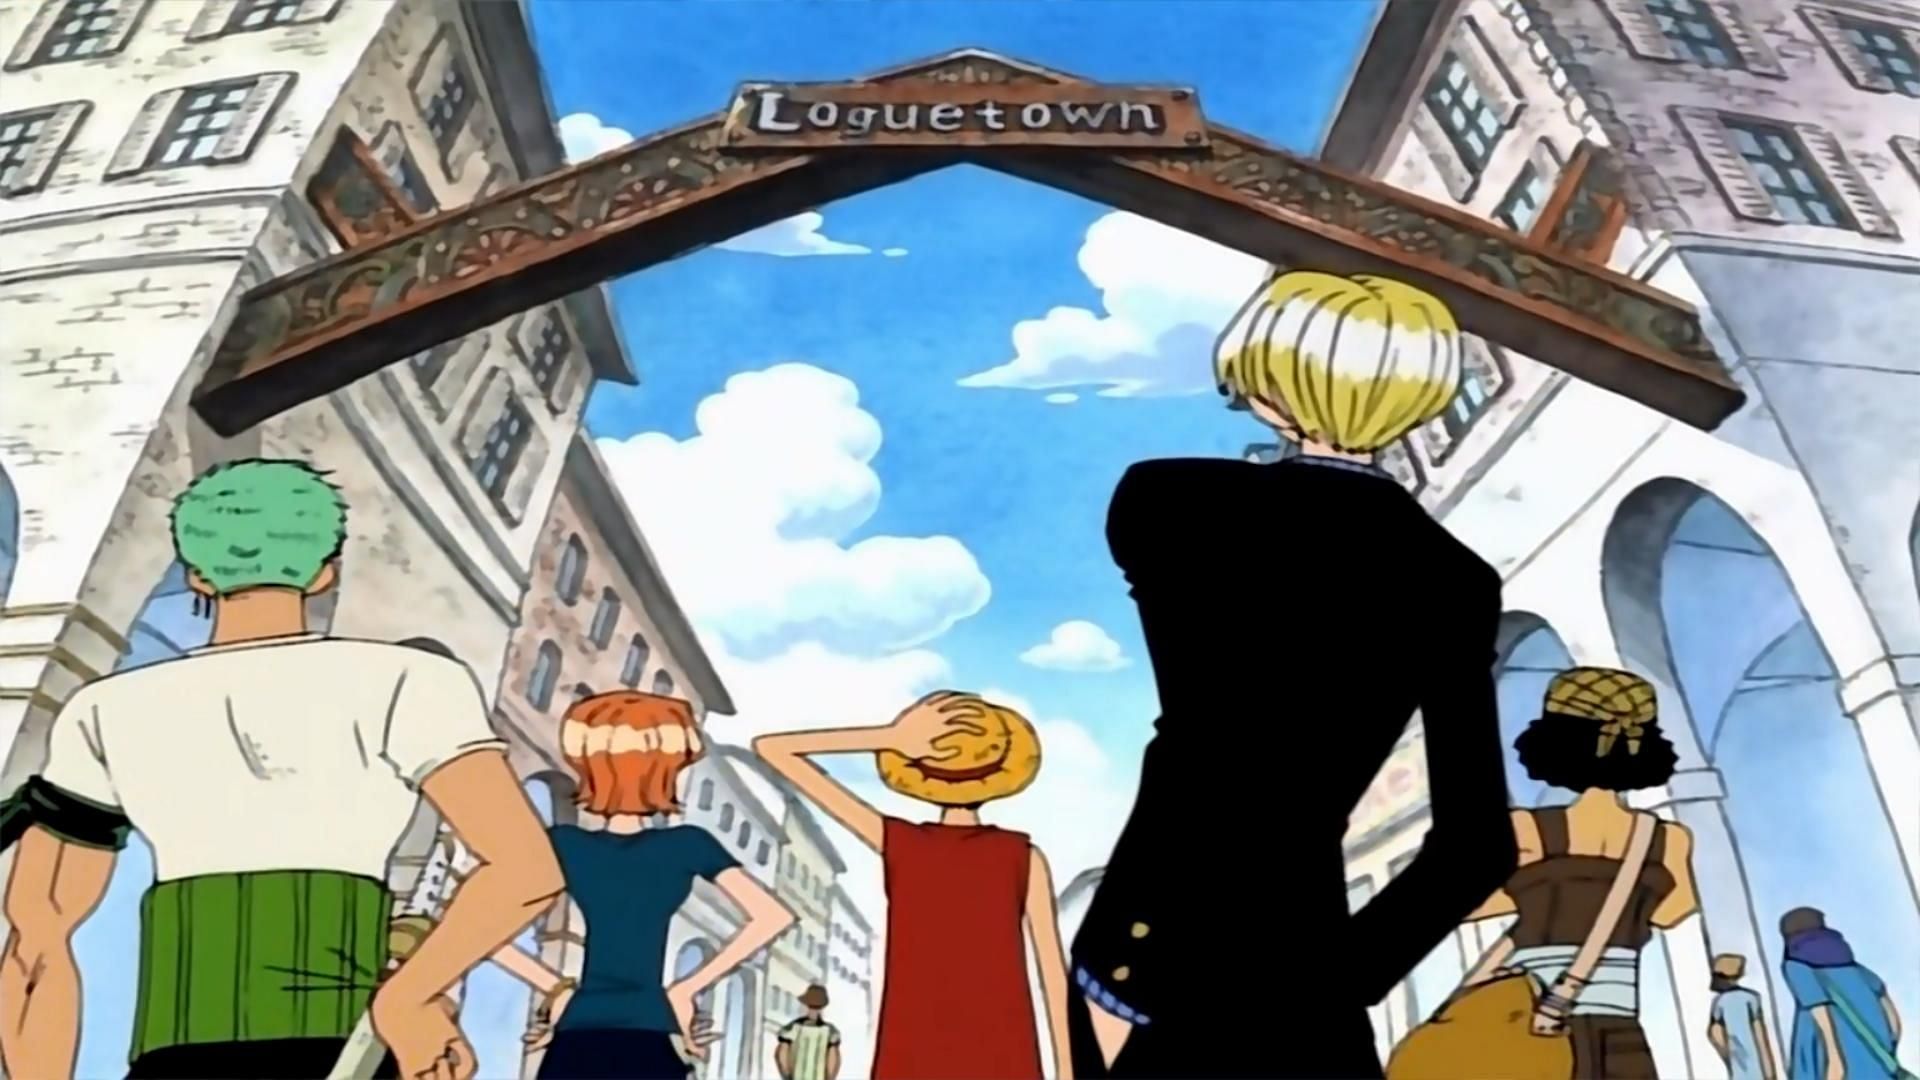 The Straw Hat Pirates in Rogue Town (Image via Toei Animation, One Piece)